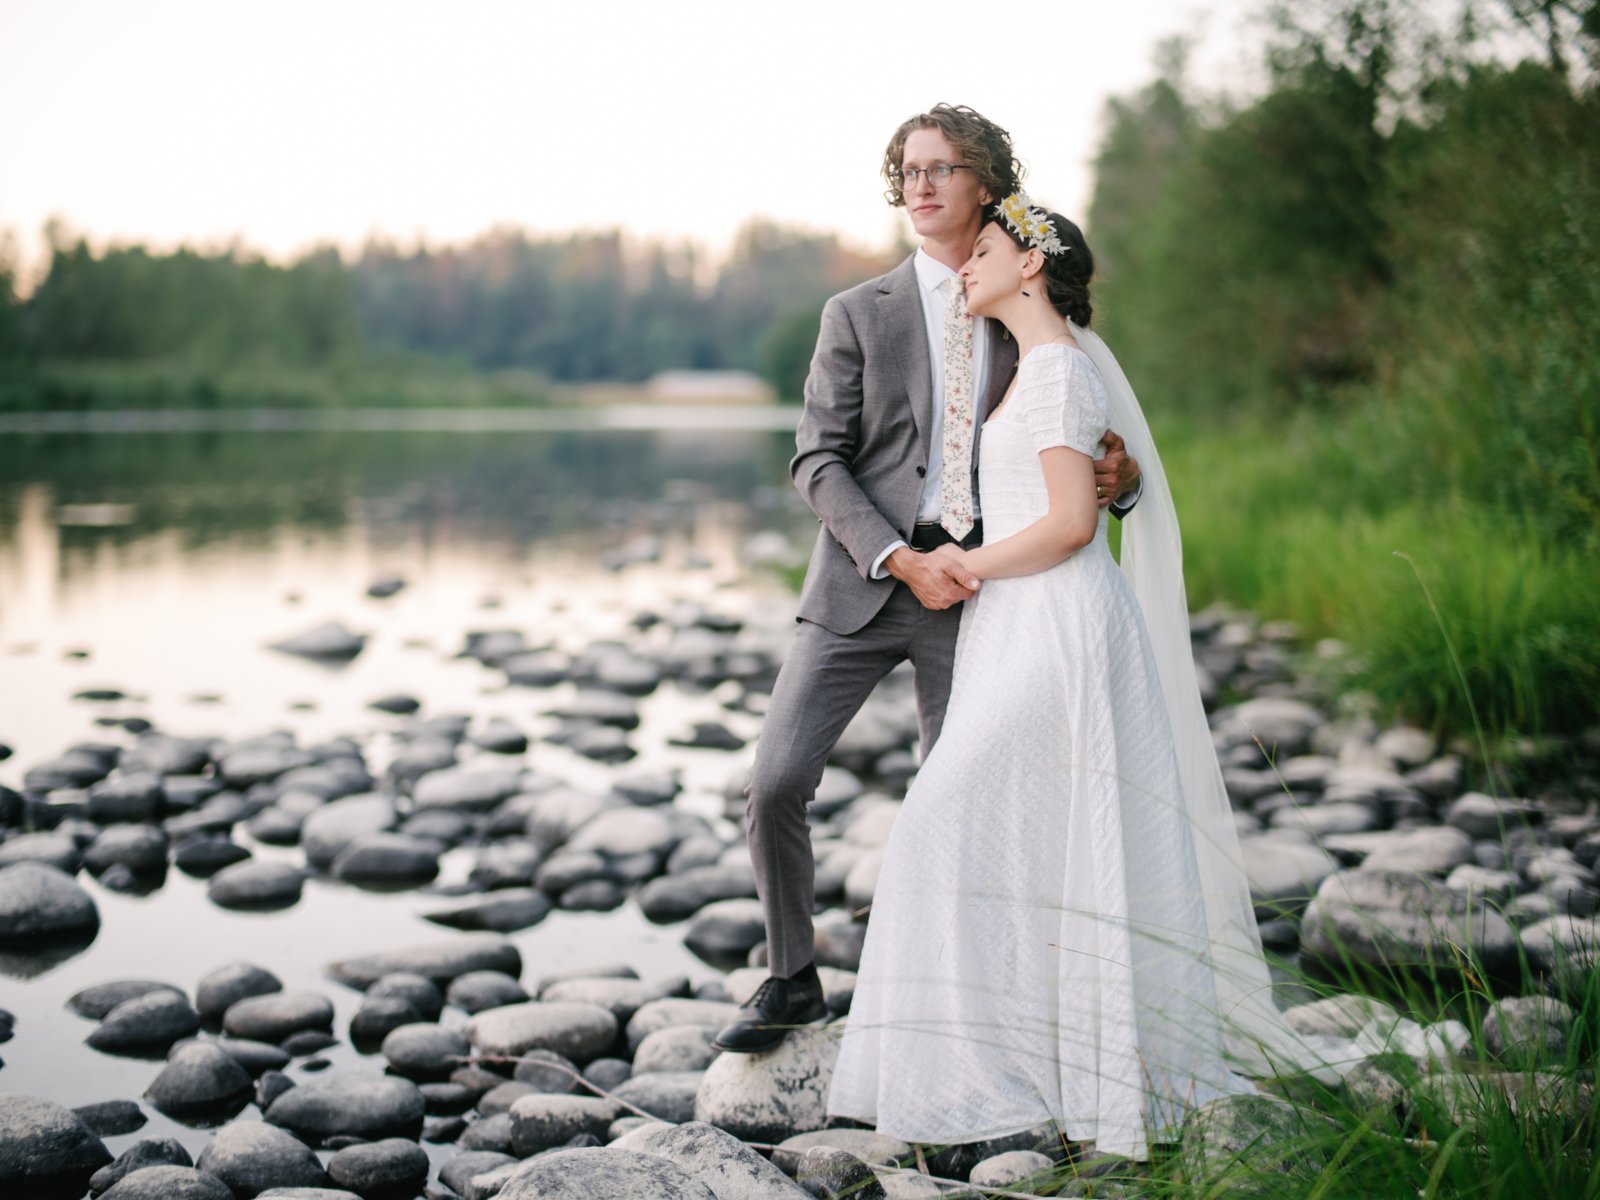  Bride and groom rest together by river bank at late sunset 